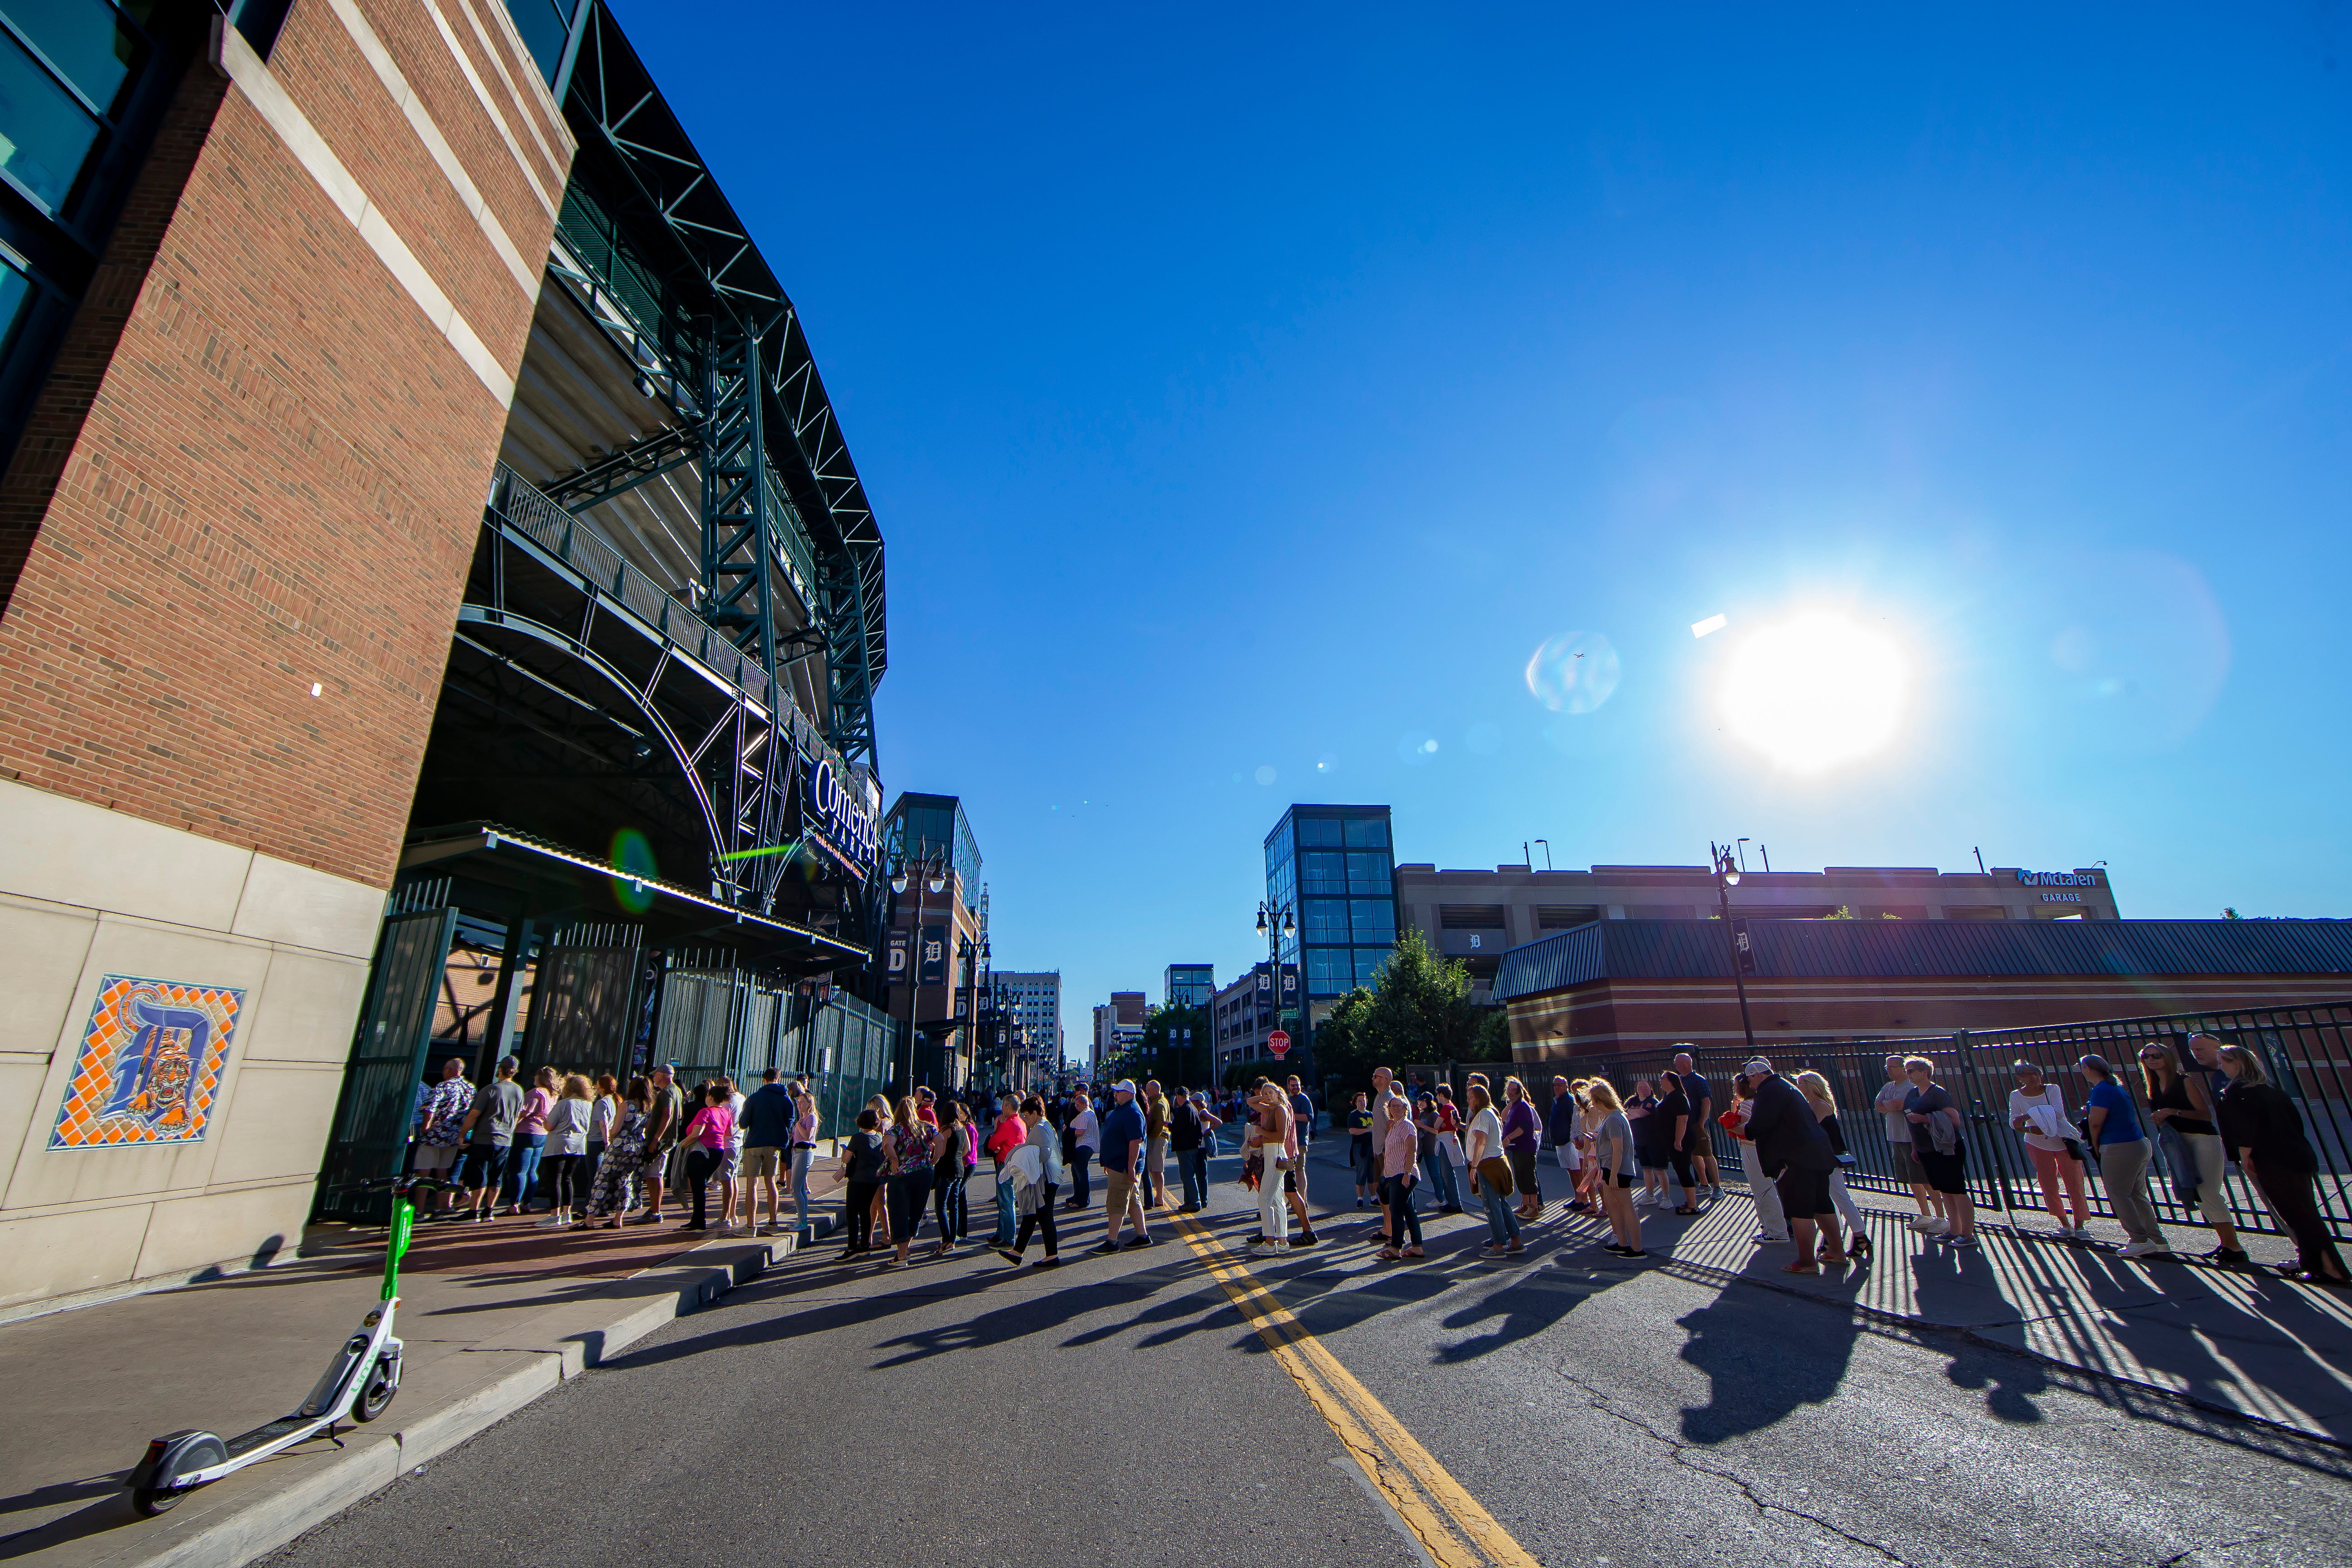 Fans wait in line to attend the Billy Joel concert at Comerica Park in Detroit.